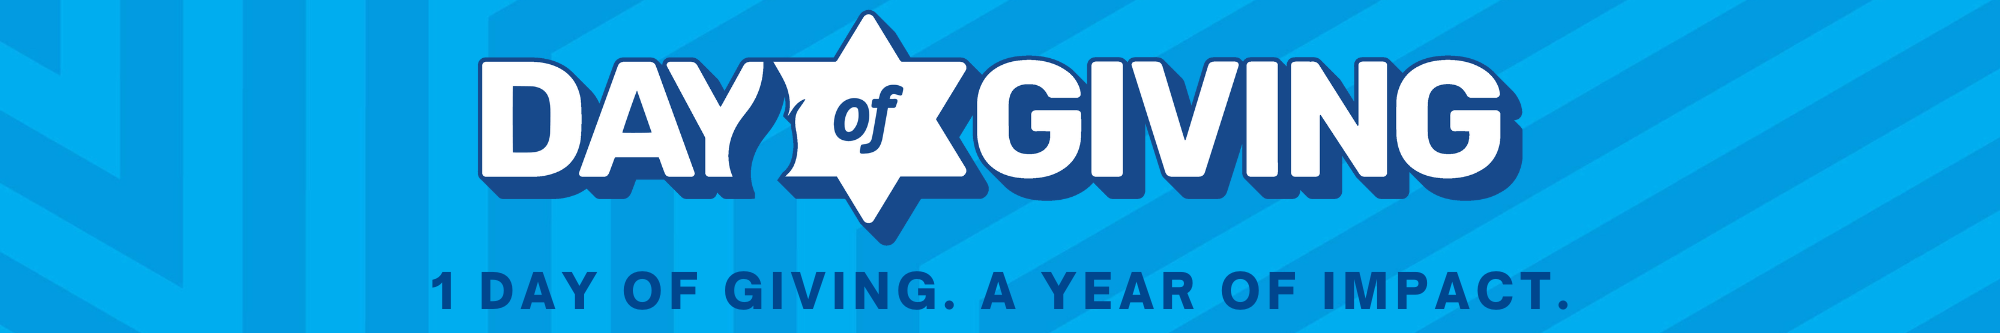 Day of Giving - 1 Day of Giving, A Year of Impact